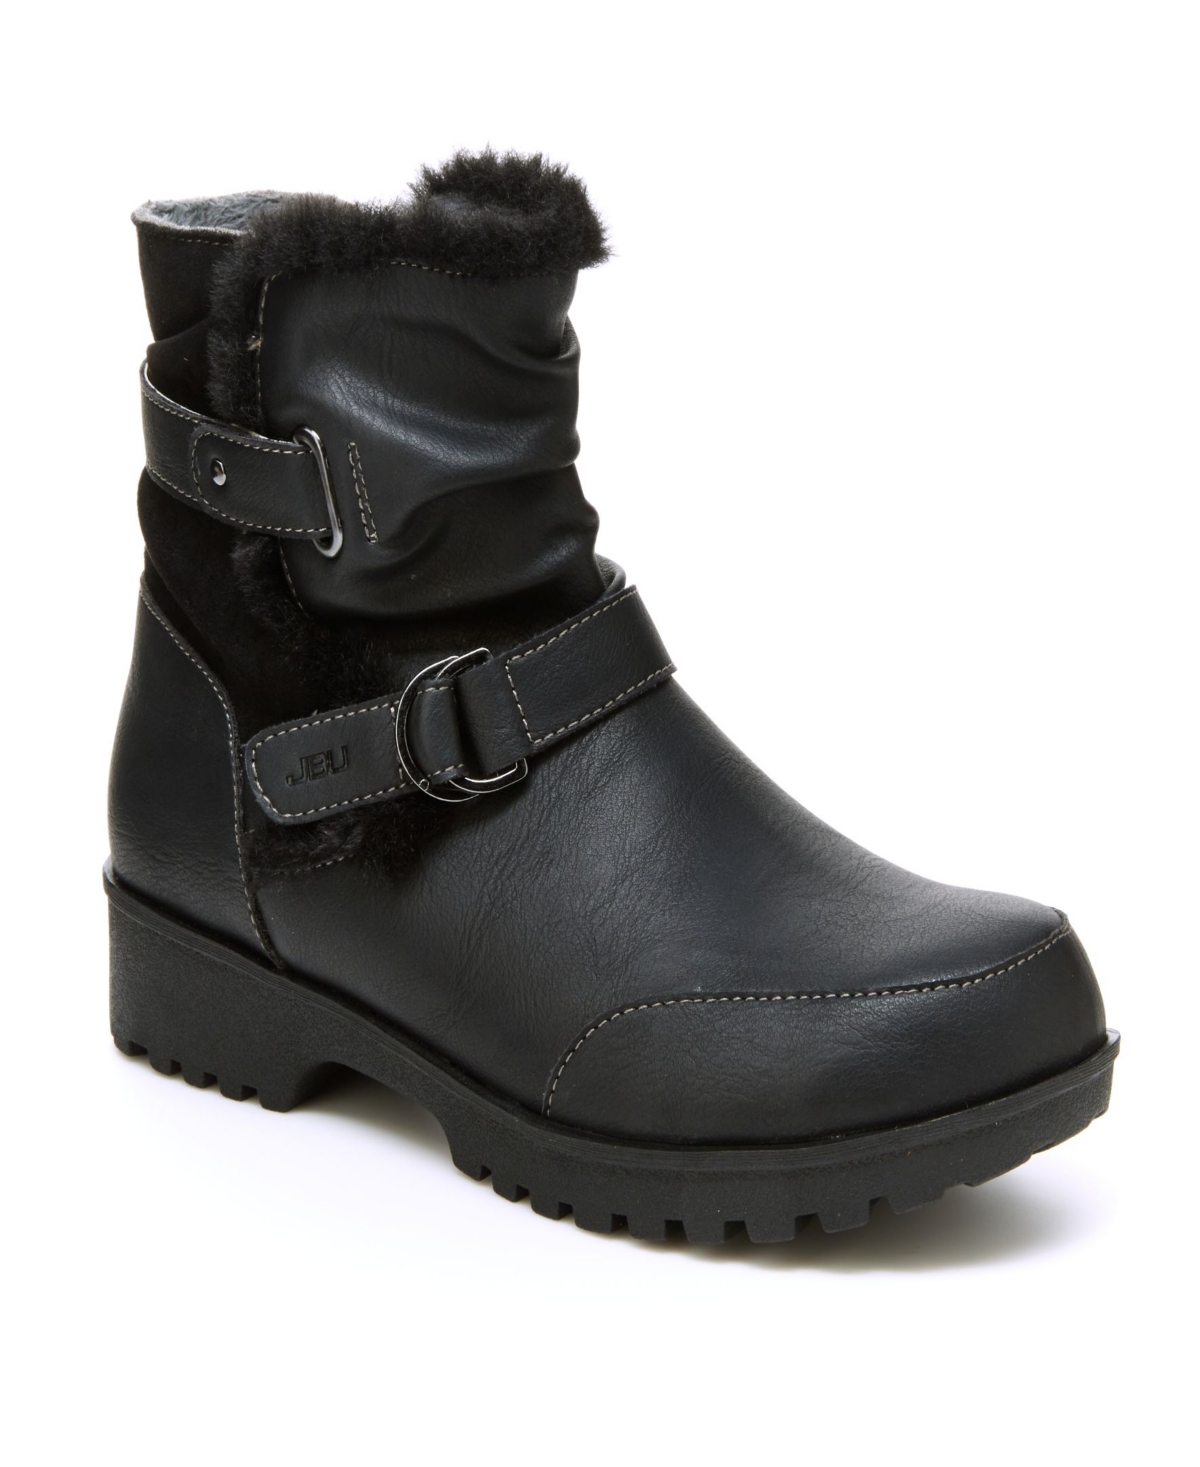 Jbu Indiana Water-resistant Ankle Boot Women's Shoes